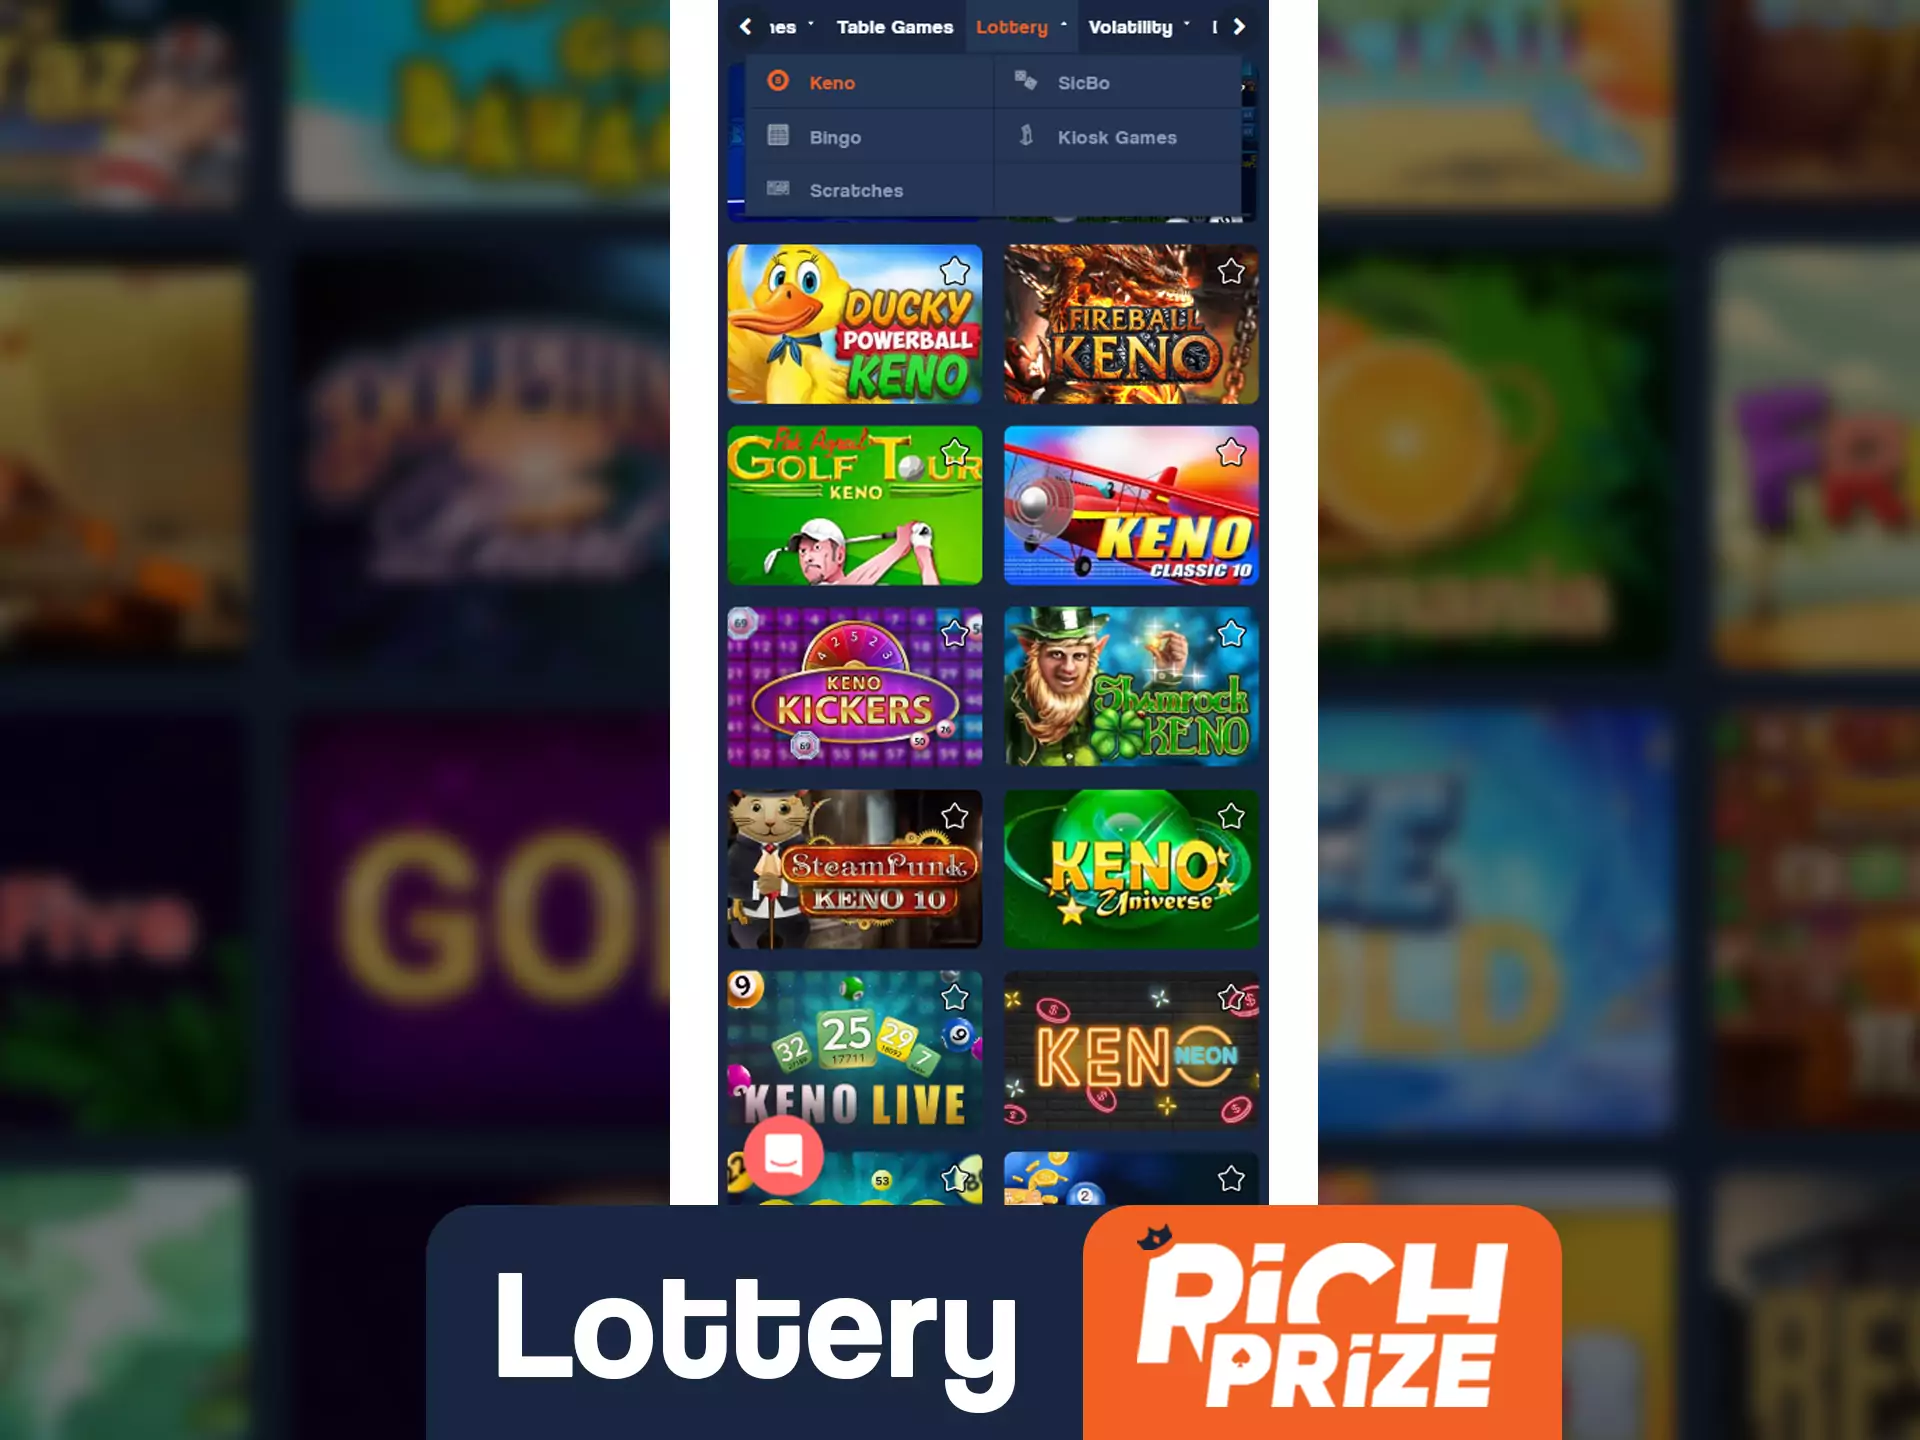 Win jackpot with one ticket at Richprize.